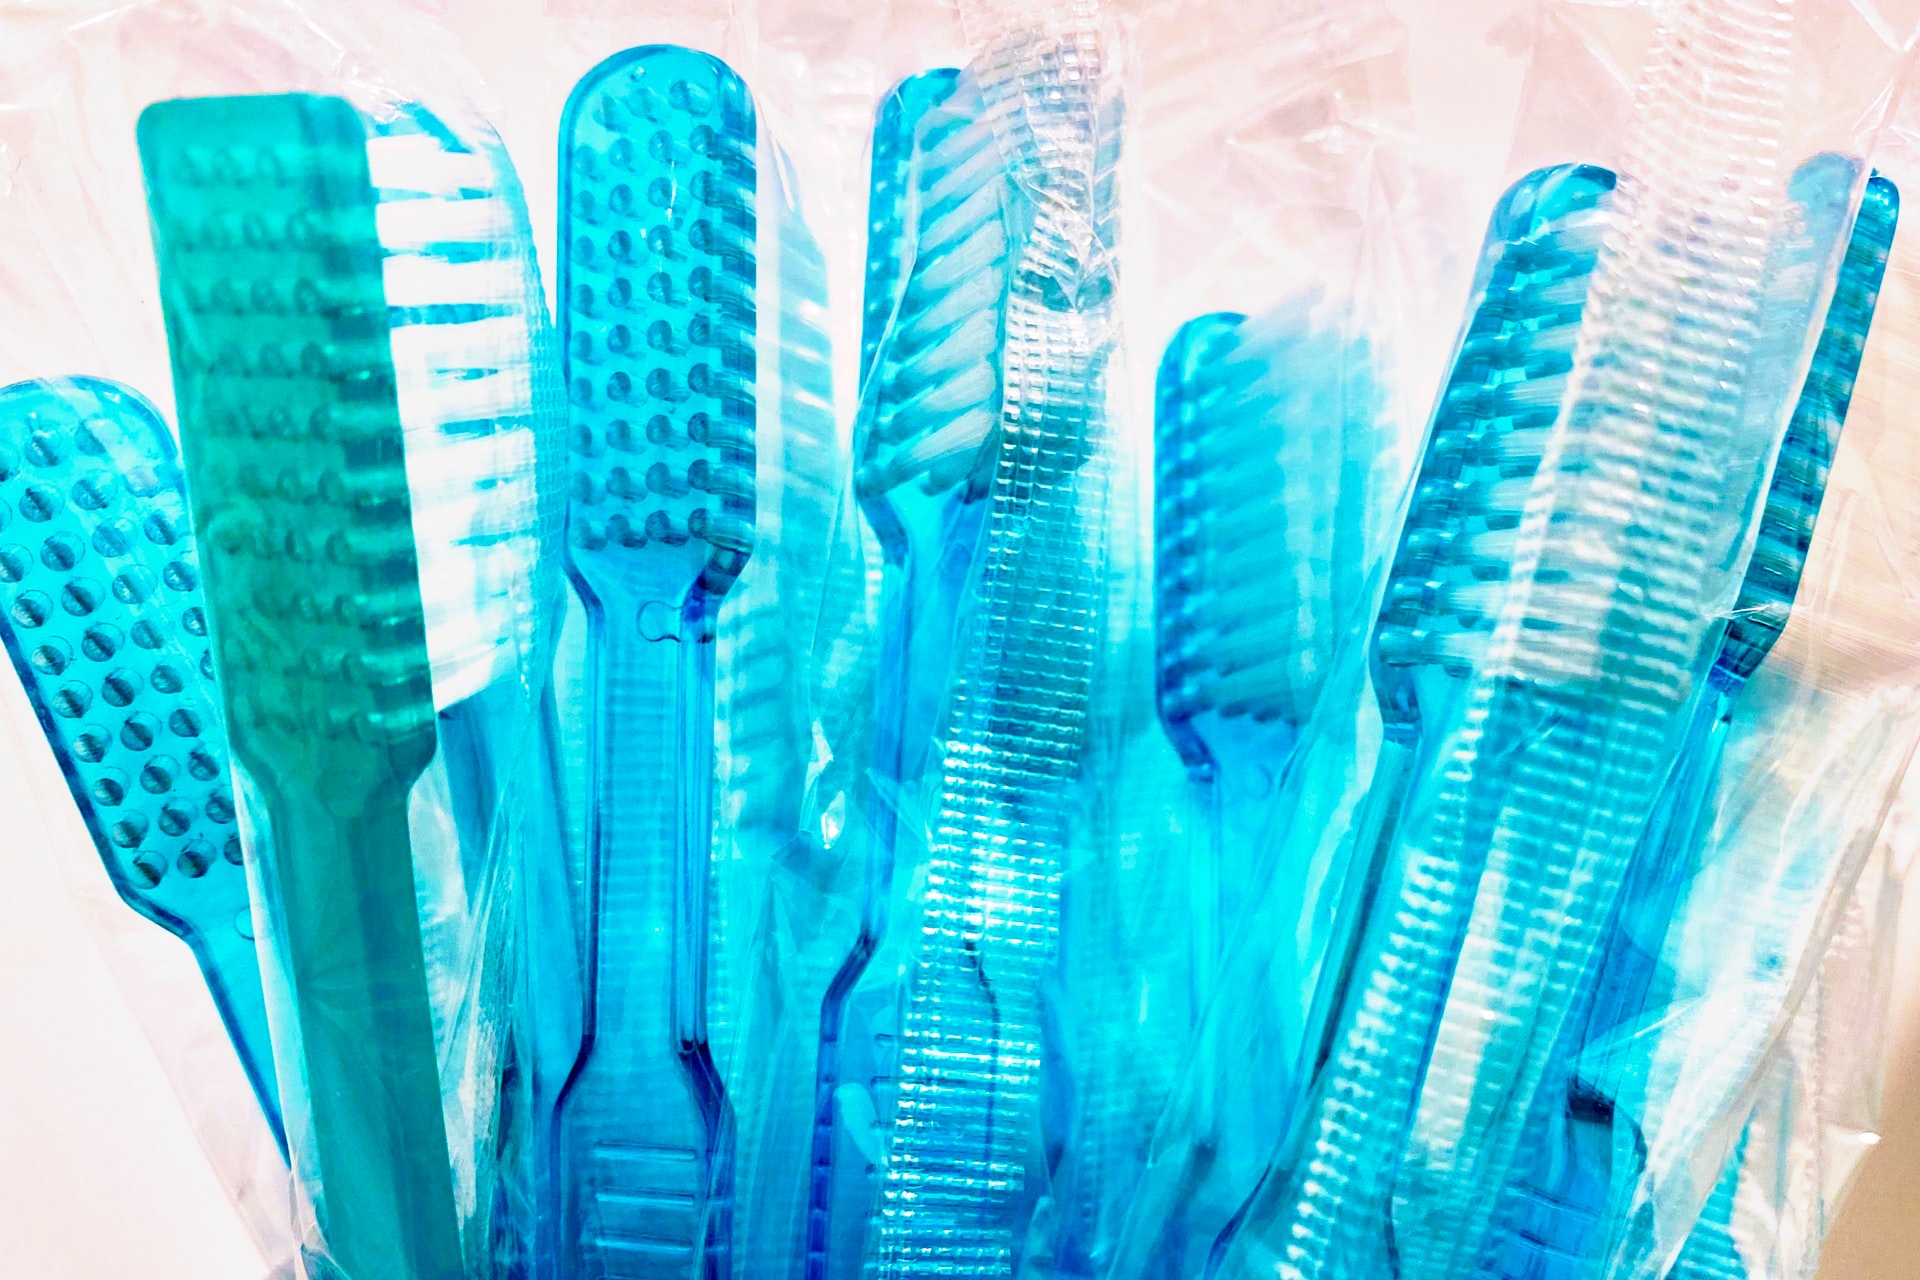 Transparent Toothbrushes made of PP Plastic